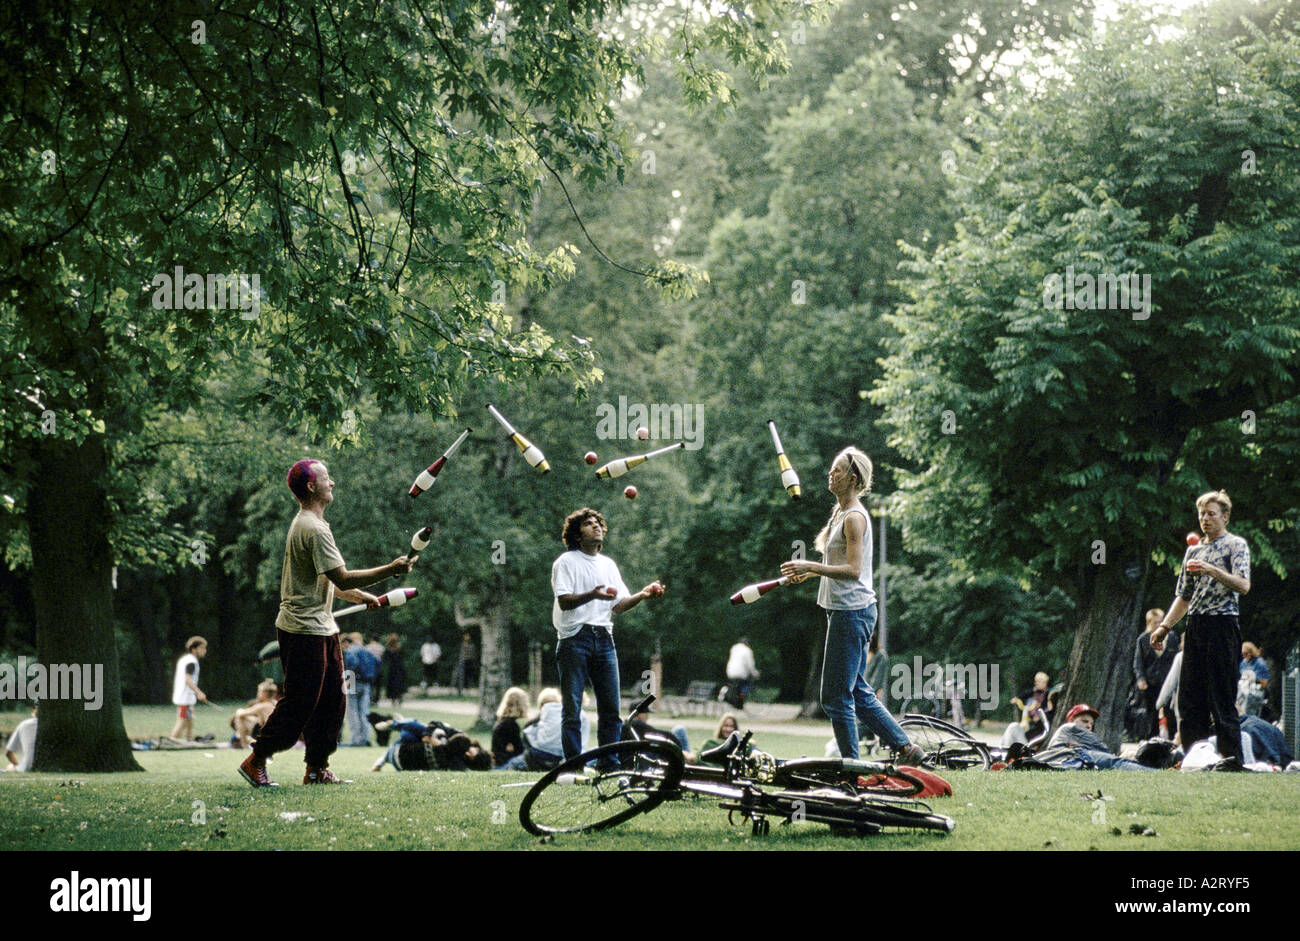 amsterdam young people juggling batons and balls in vondel park amsterdam Stock Photo